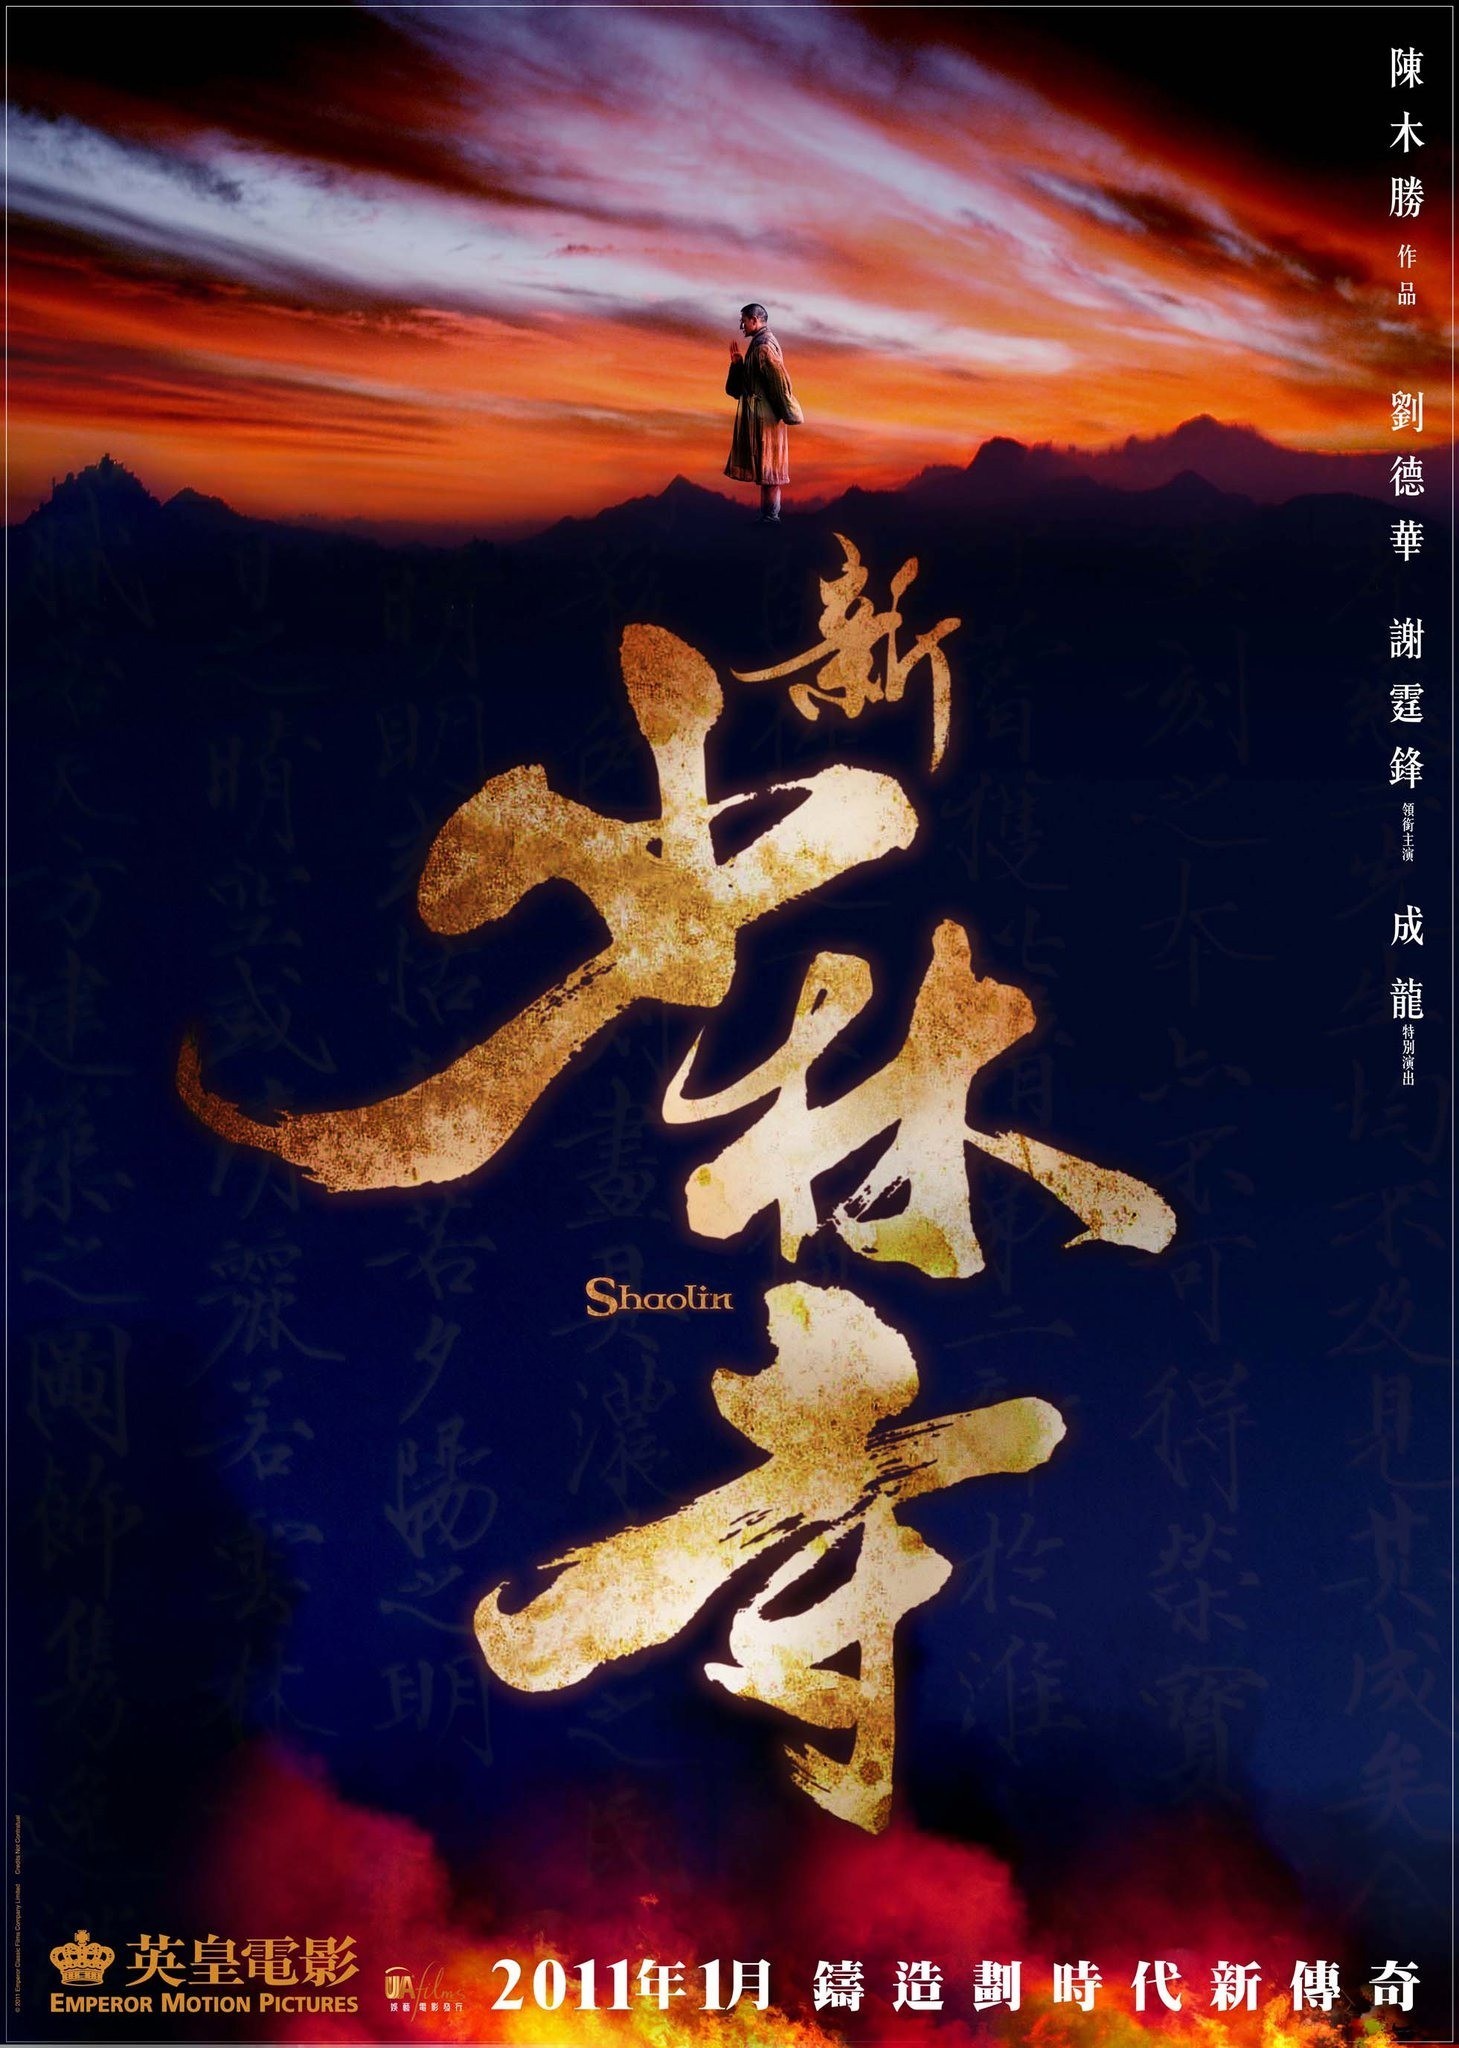 Mega Sized Movie Poster Image for Shaolin (#1 of 4)